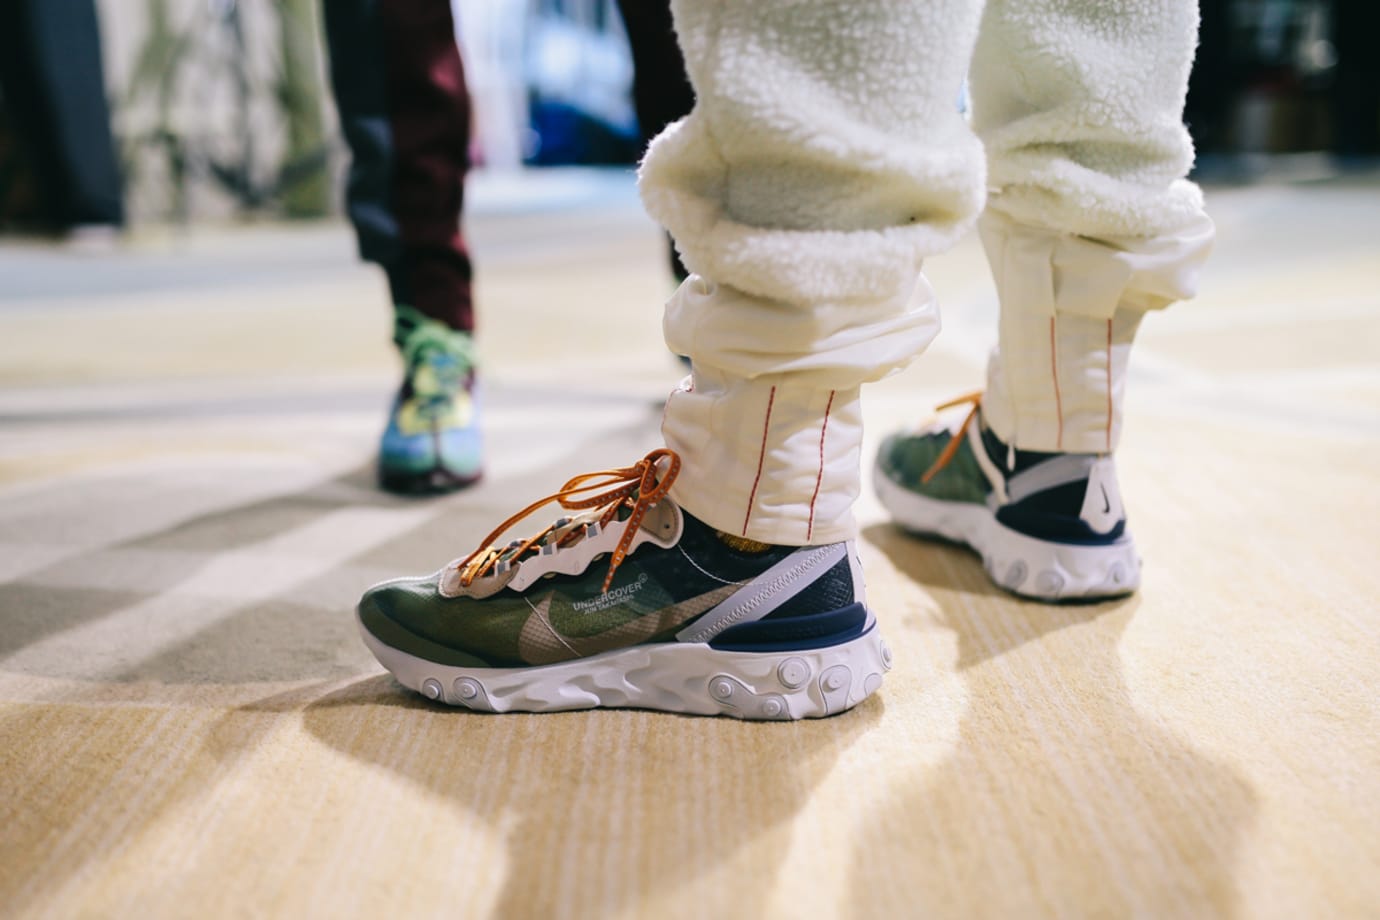 x Nike React Element 87 | Sole Collector